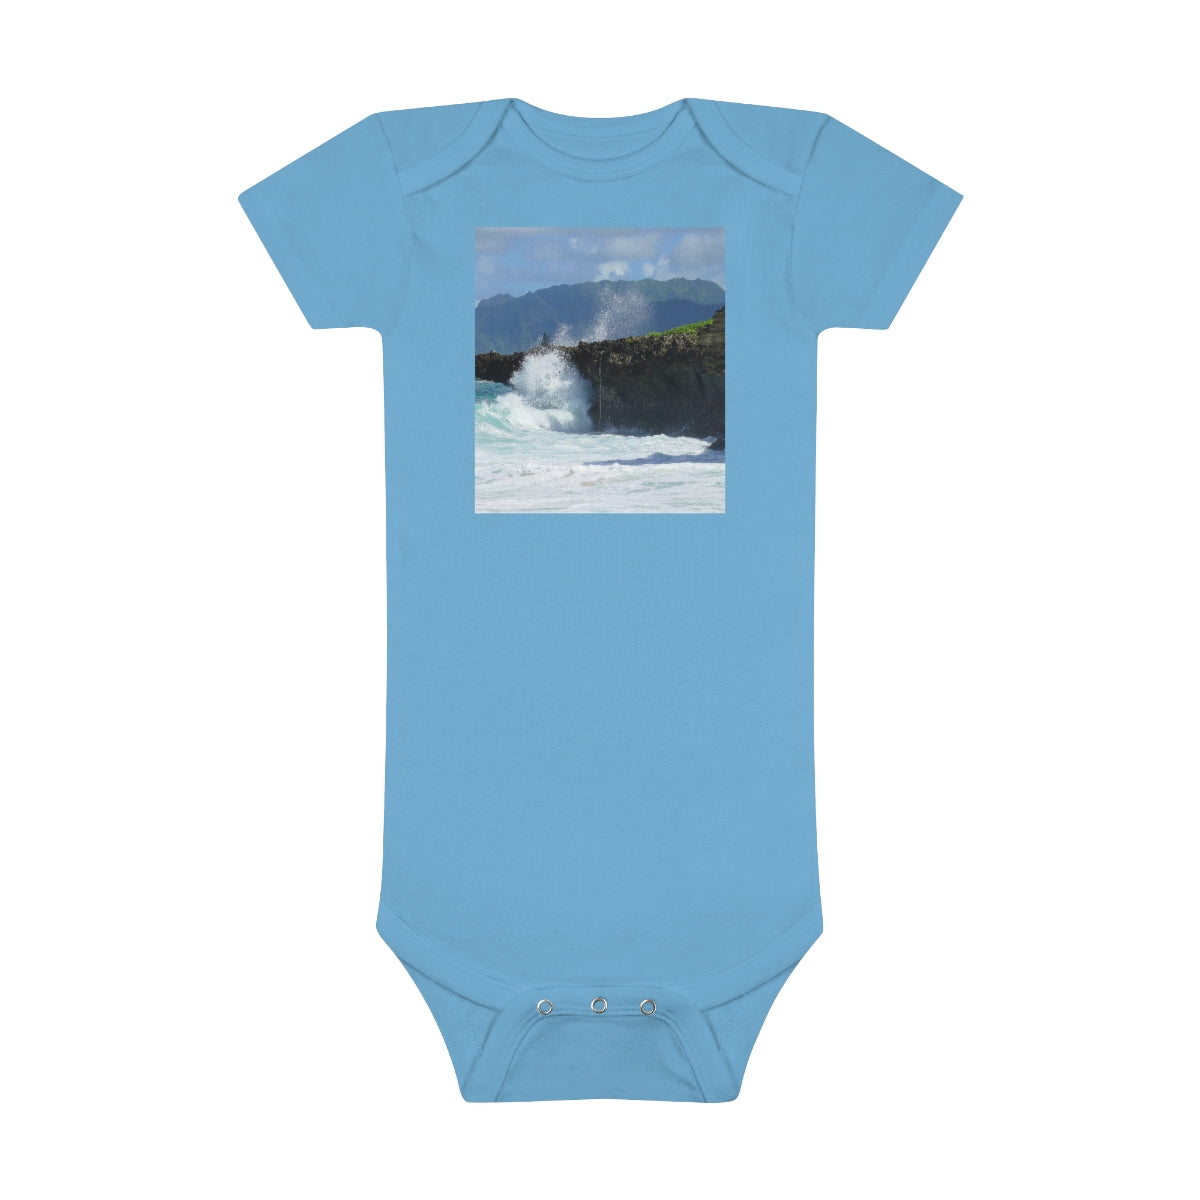 Rockin Surfer's Rope - Baby Short Sleeve Onesie - Fry1Productions